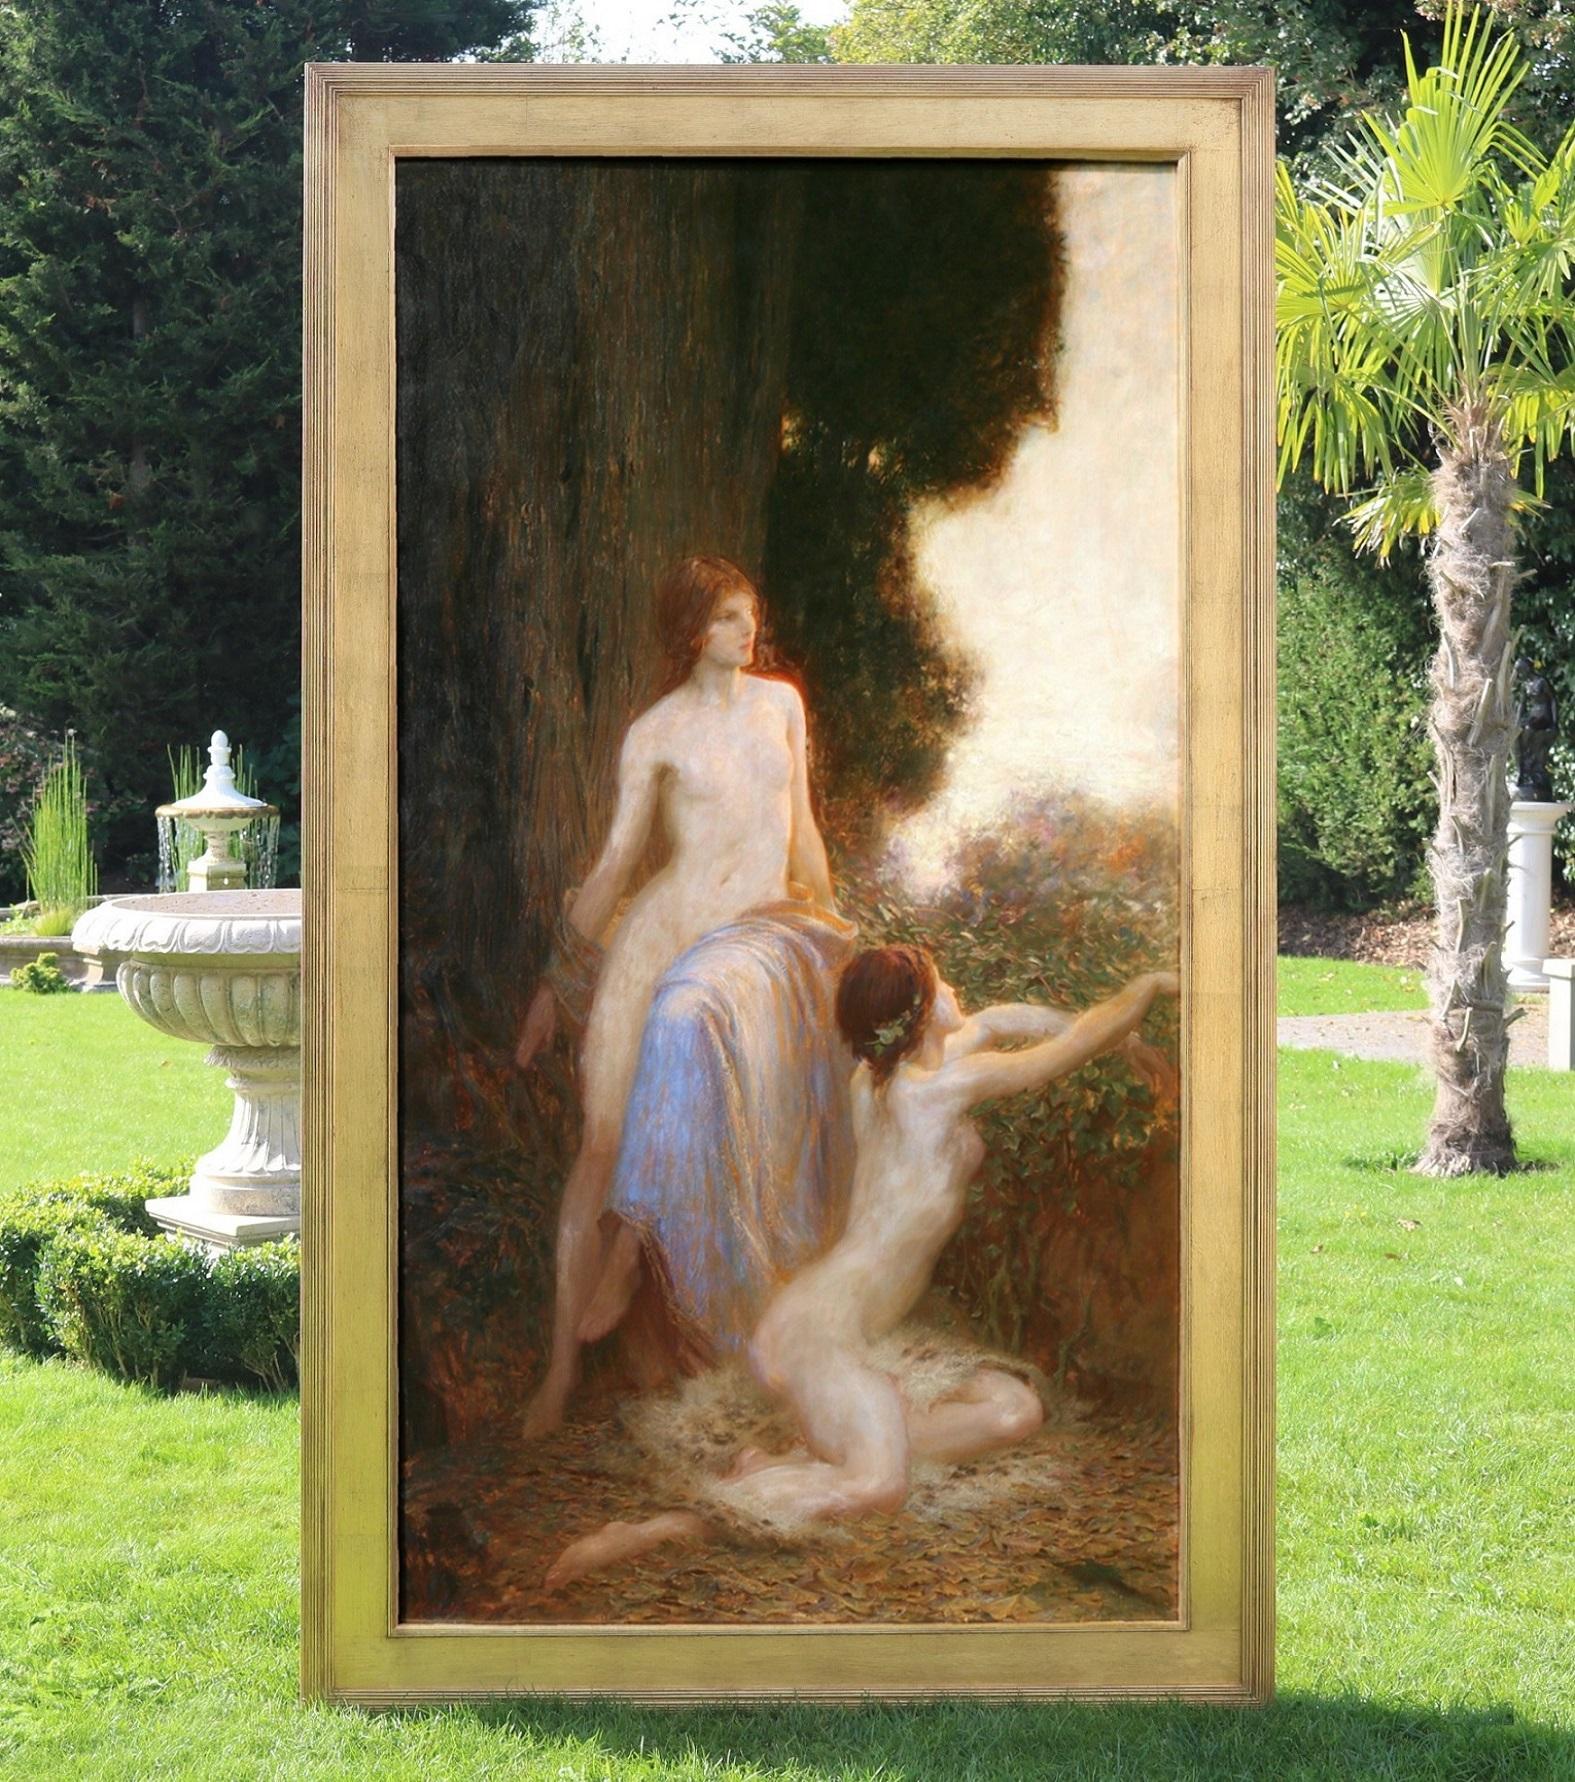 Awakening - Monumental Royal Academy Oil Painting of Nymphs Neoclassical Nudes